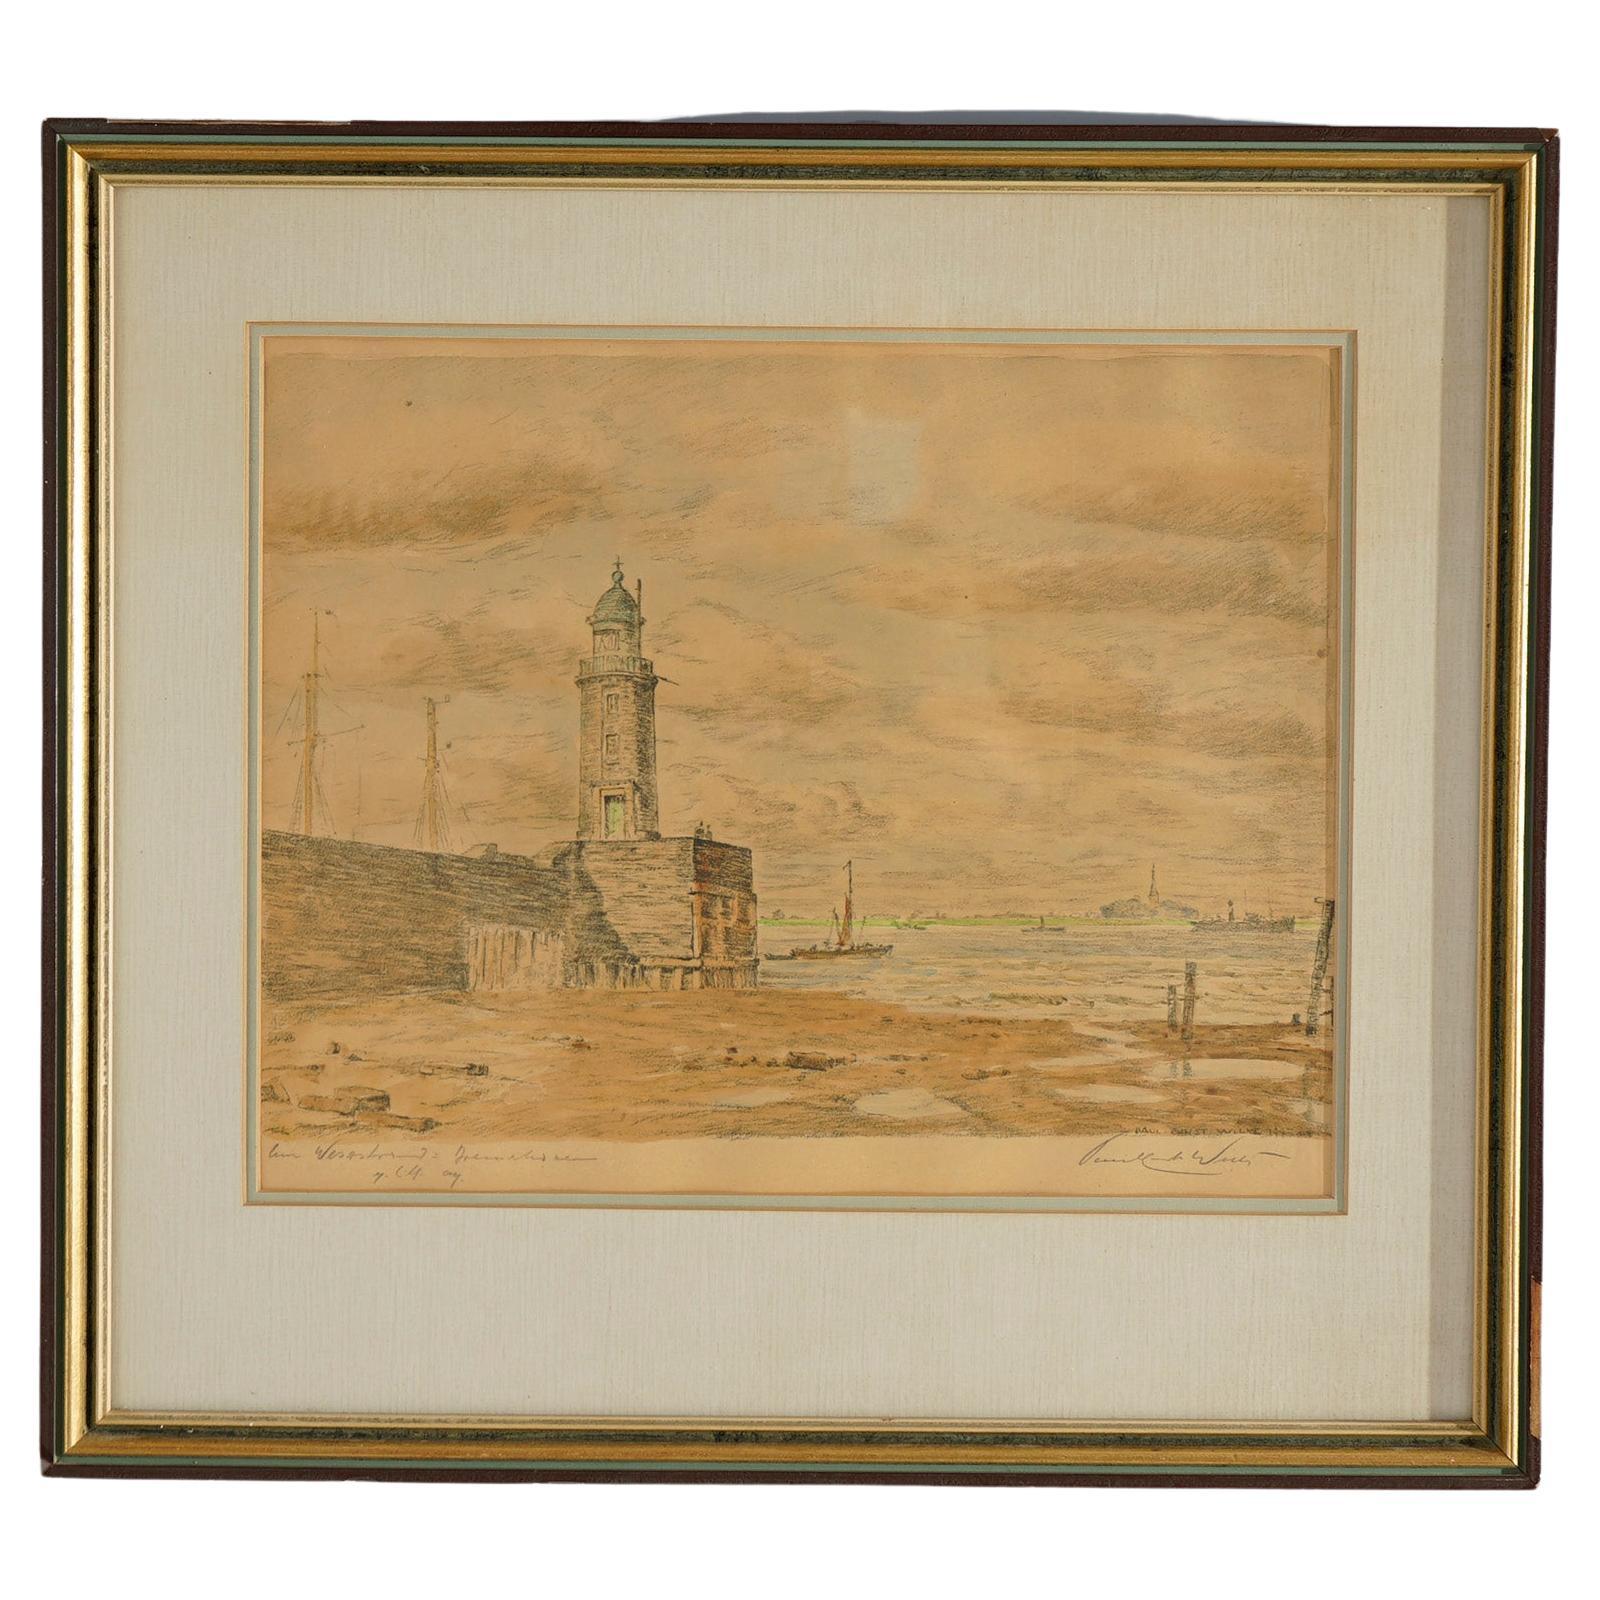 Antique Watercolor Painting, Lighthouse Seascape by Paul Ernst Wilke, c1940